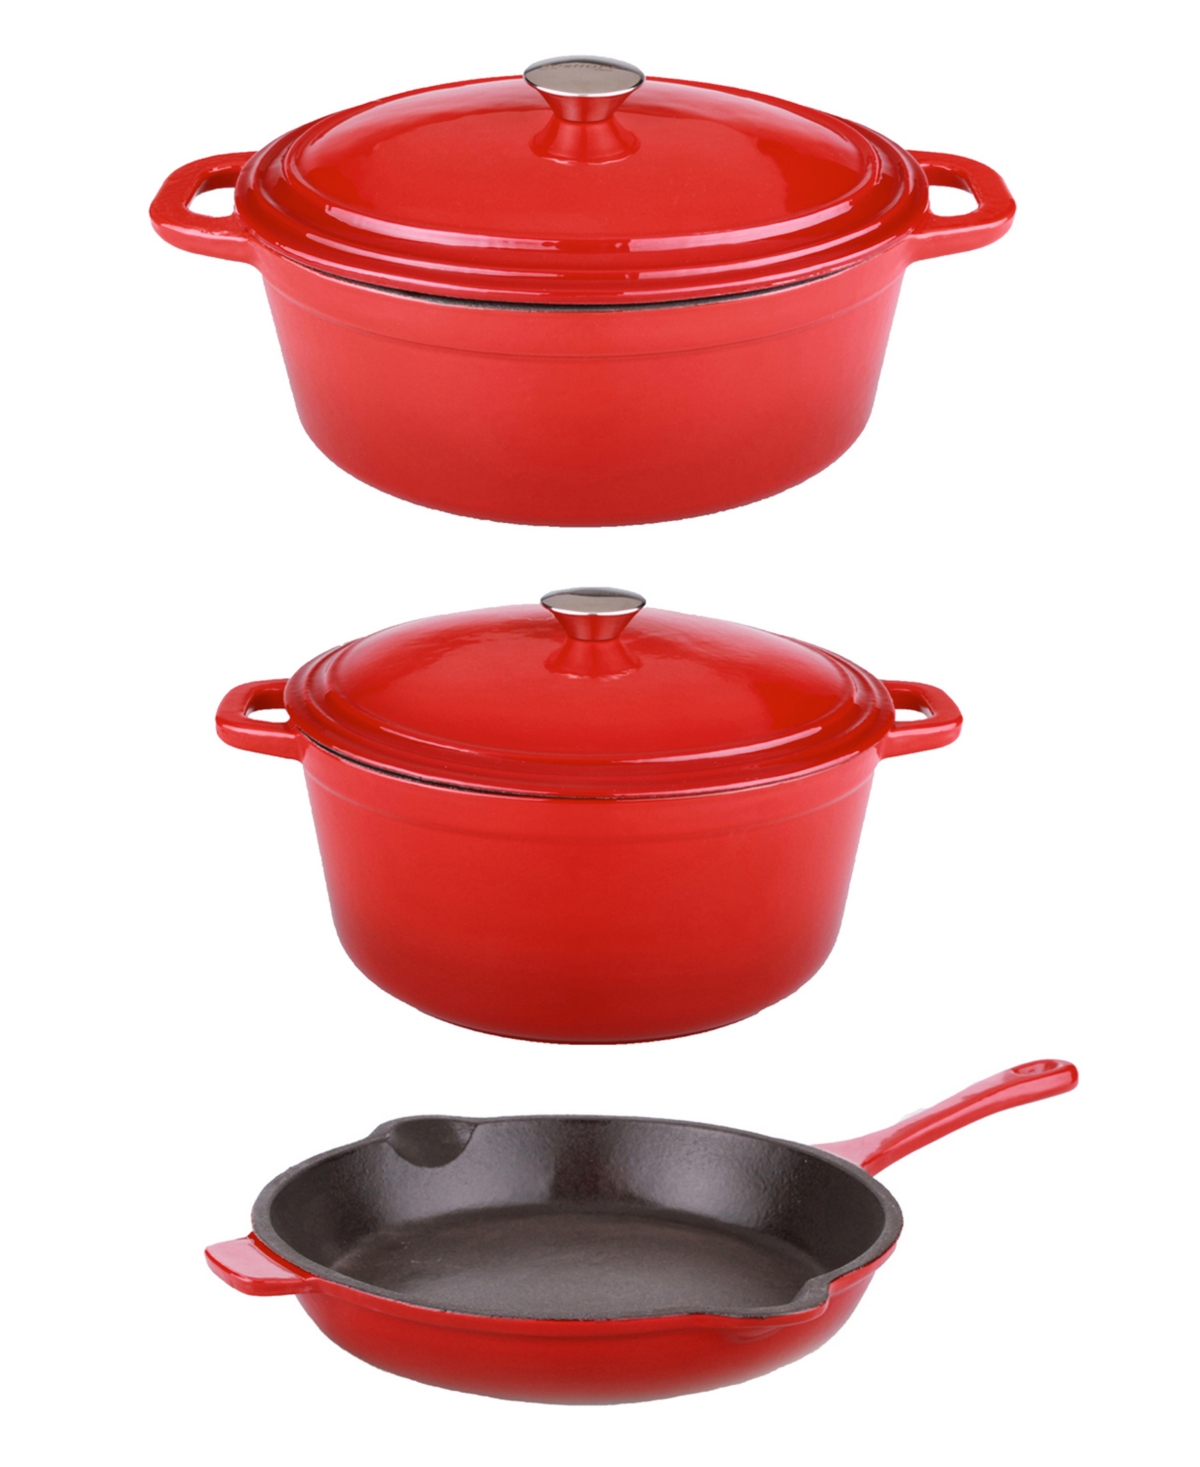 BergHOFF Neo Collection 5-Pc. Cast Iron Cookware Set